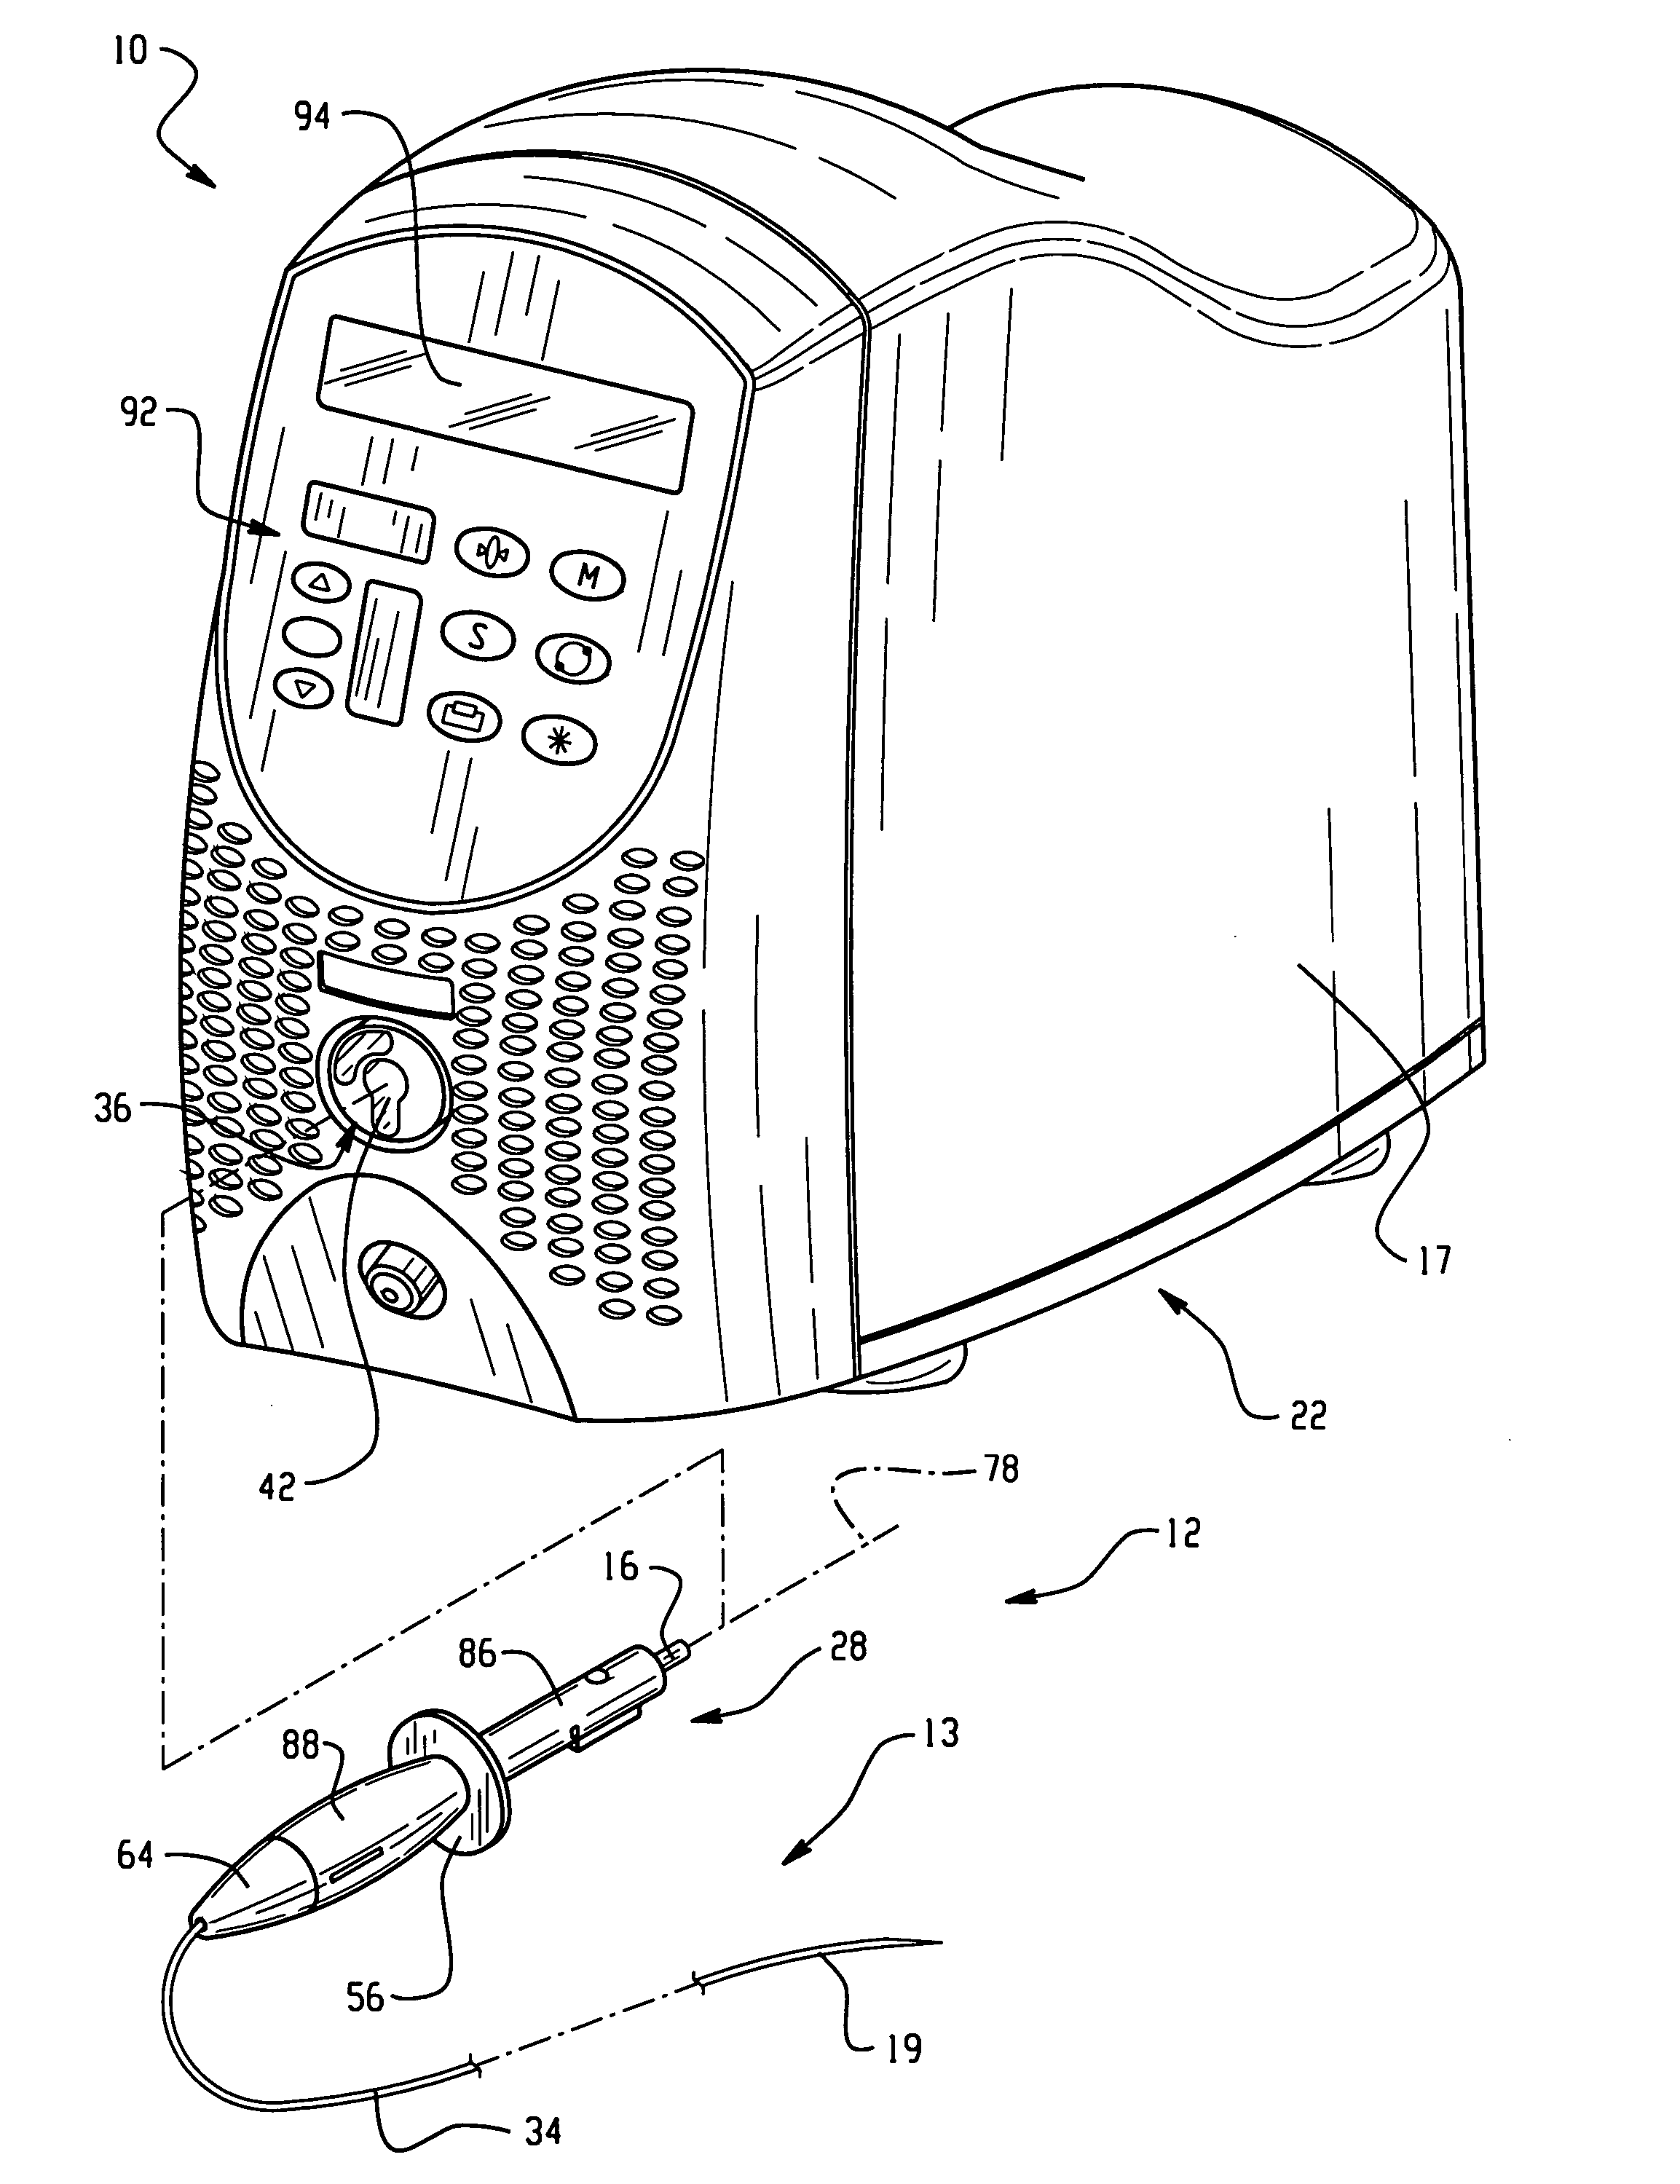 Energy delivery device with self-heat calibration